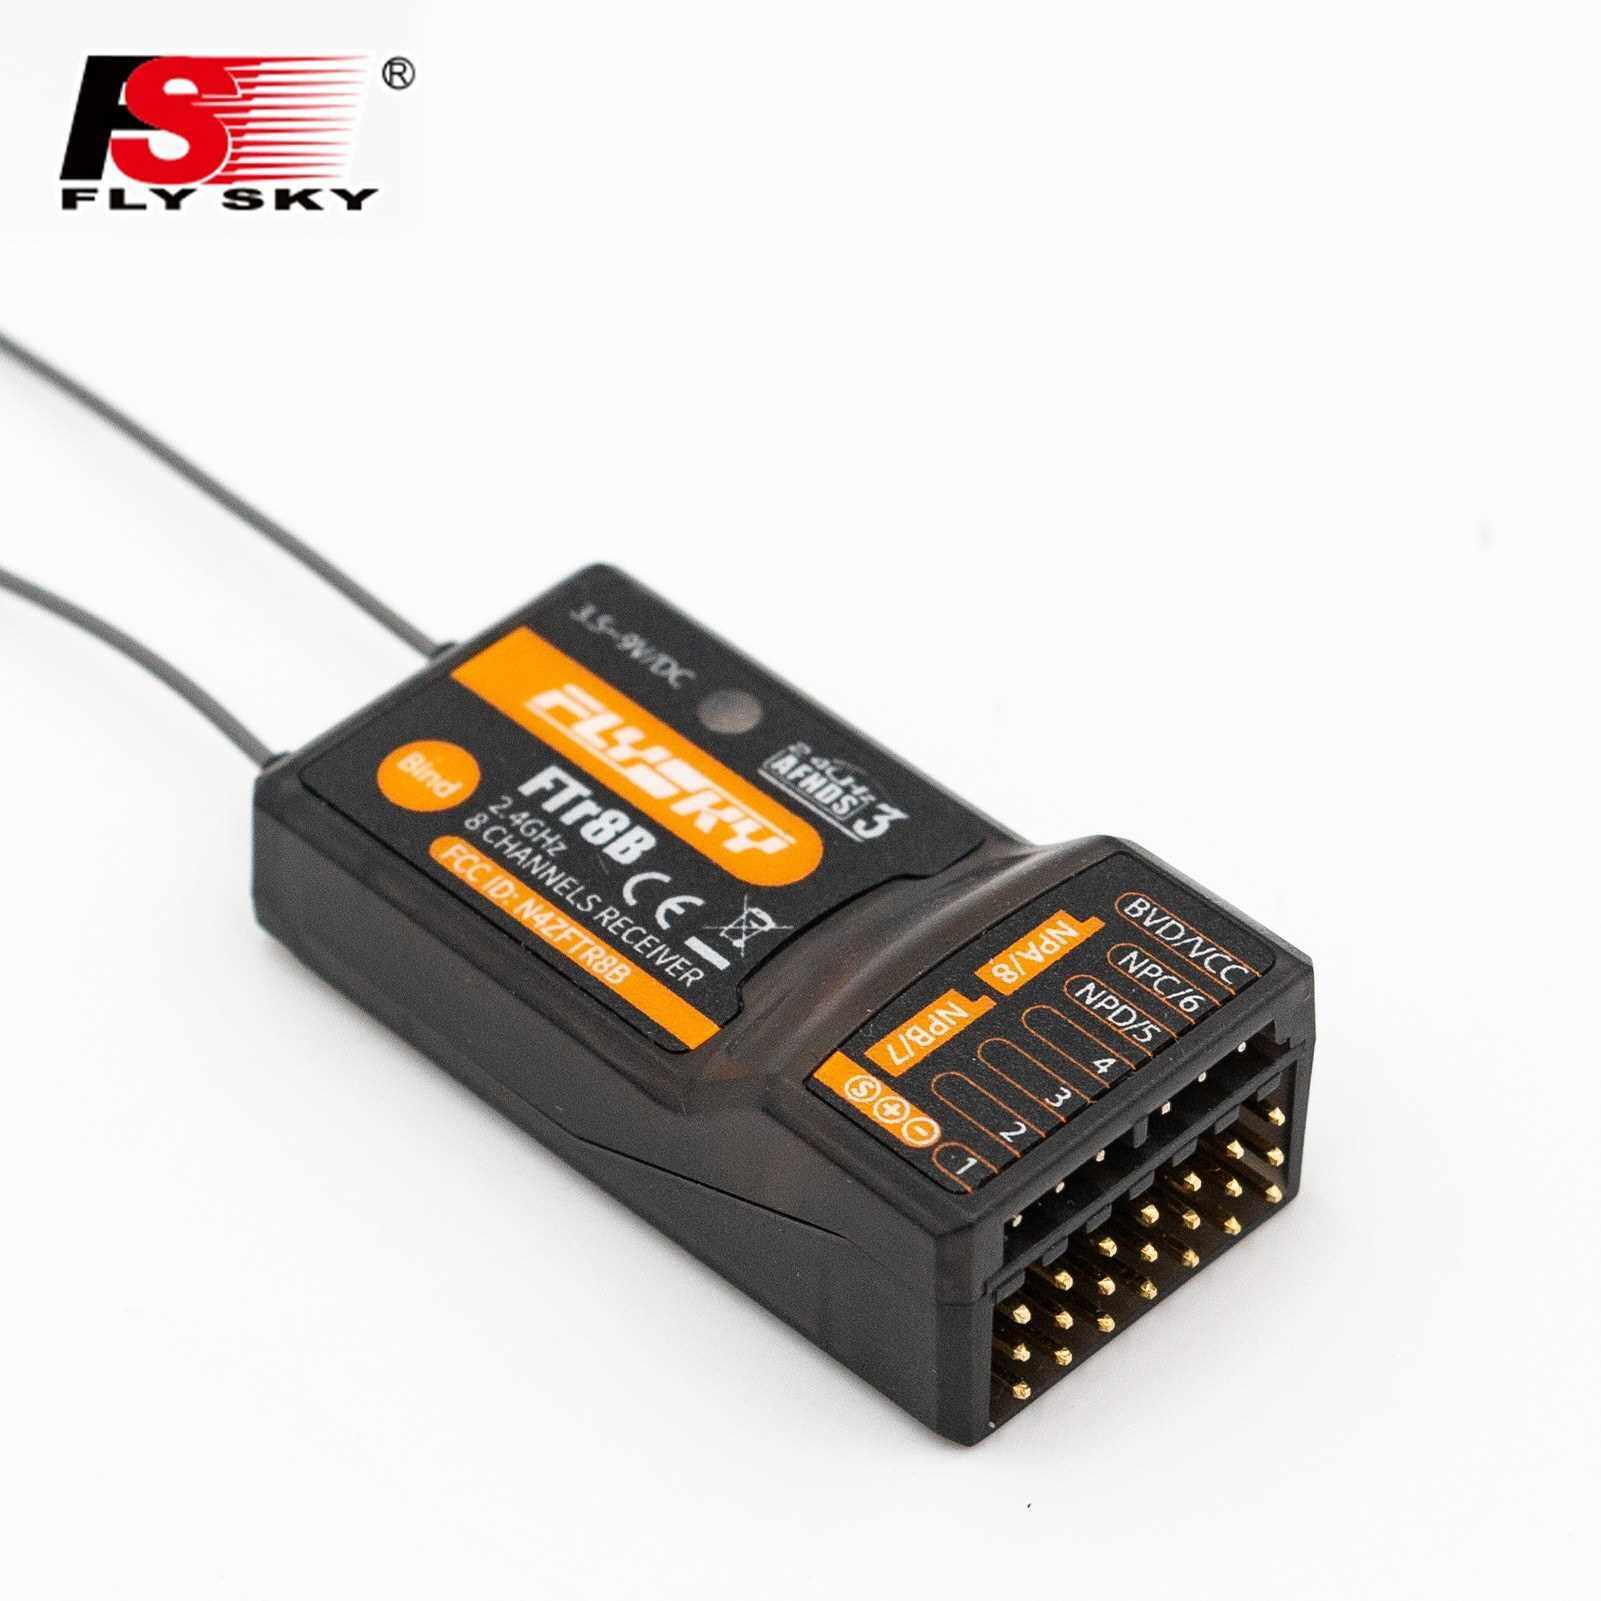 FlySky FTr8B 2.4GHz 8CH Receiver for RC Airplane Helicopter Fixed Wing Glider Engineering Vehicle Drone Dual Antenna PWM/PPM/i.BUS/S.BUS Output Compatible with AFHDS3 Transmitters RF Modules PL18 NB4 (Standard)